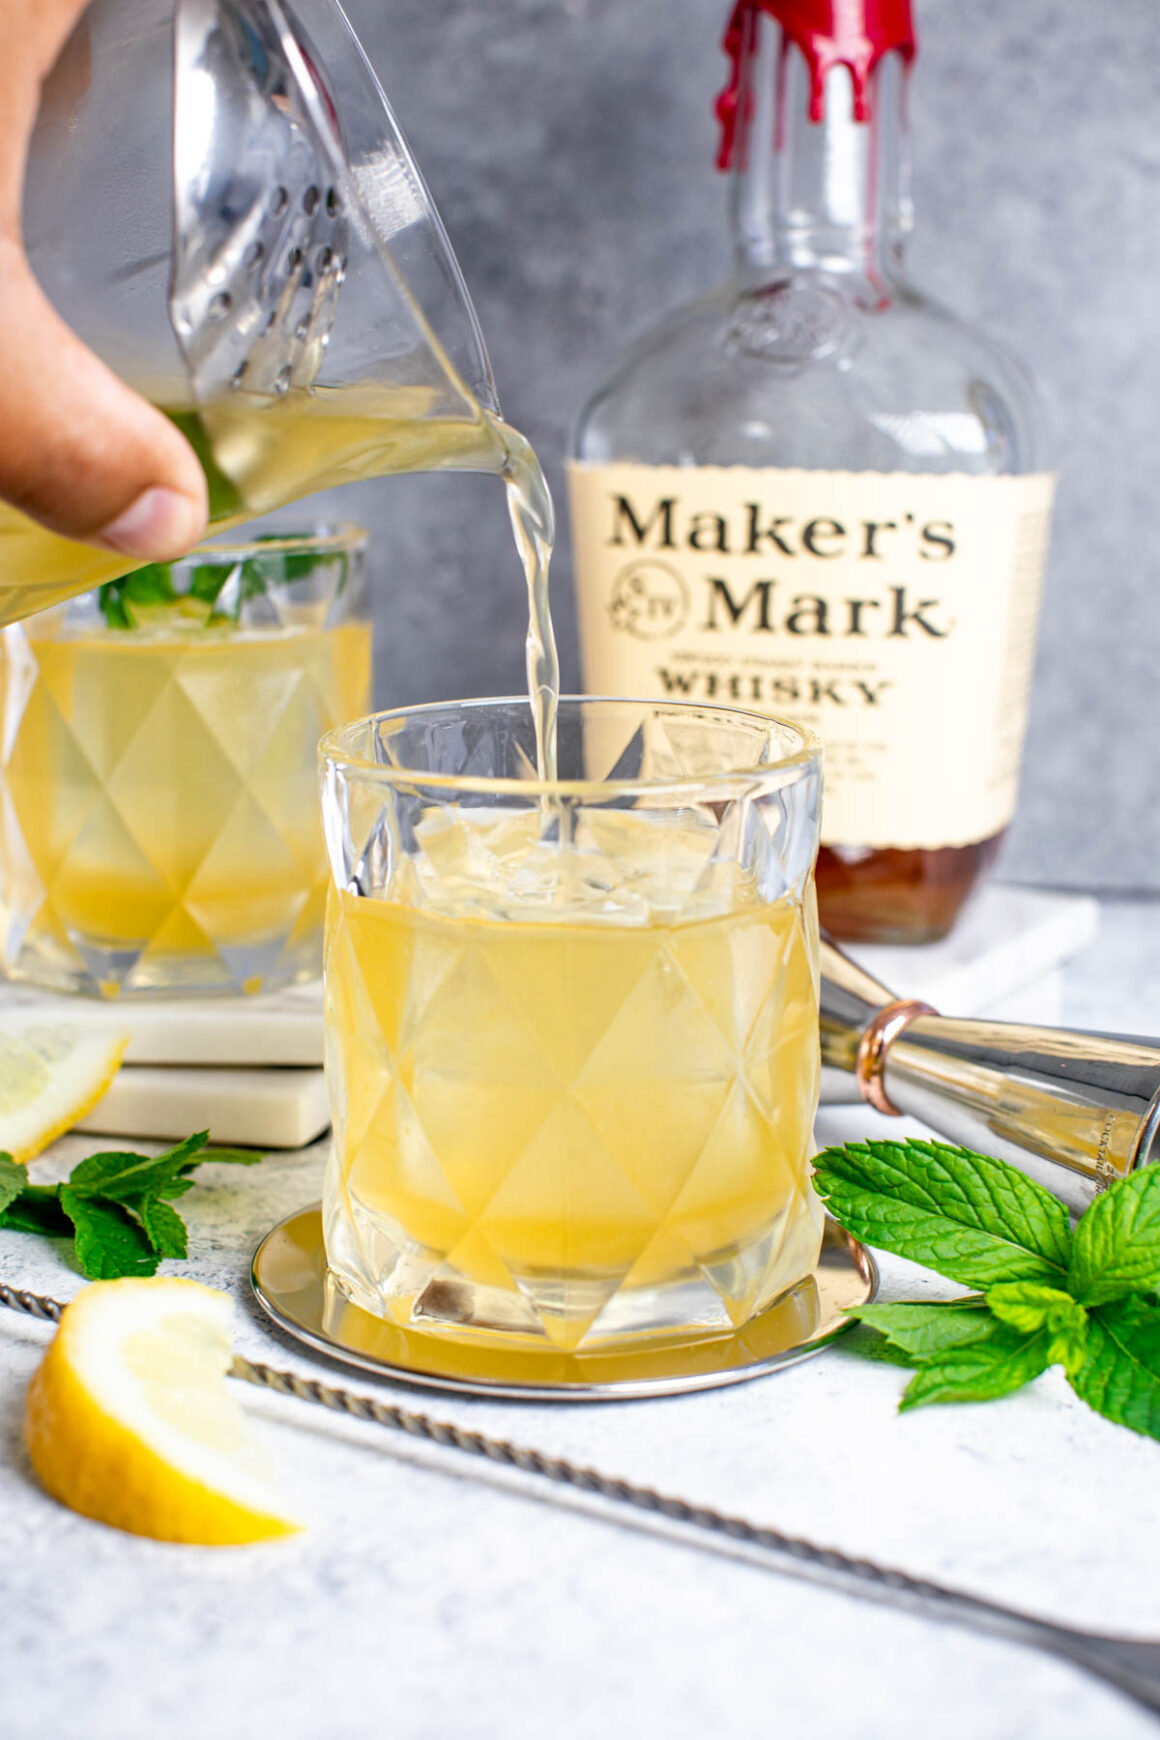 Whiskey Smash is a recipe for lovers and non-lovers of this distillate, it is simple but with a lot of flavors!